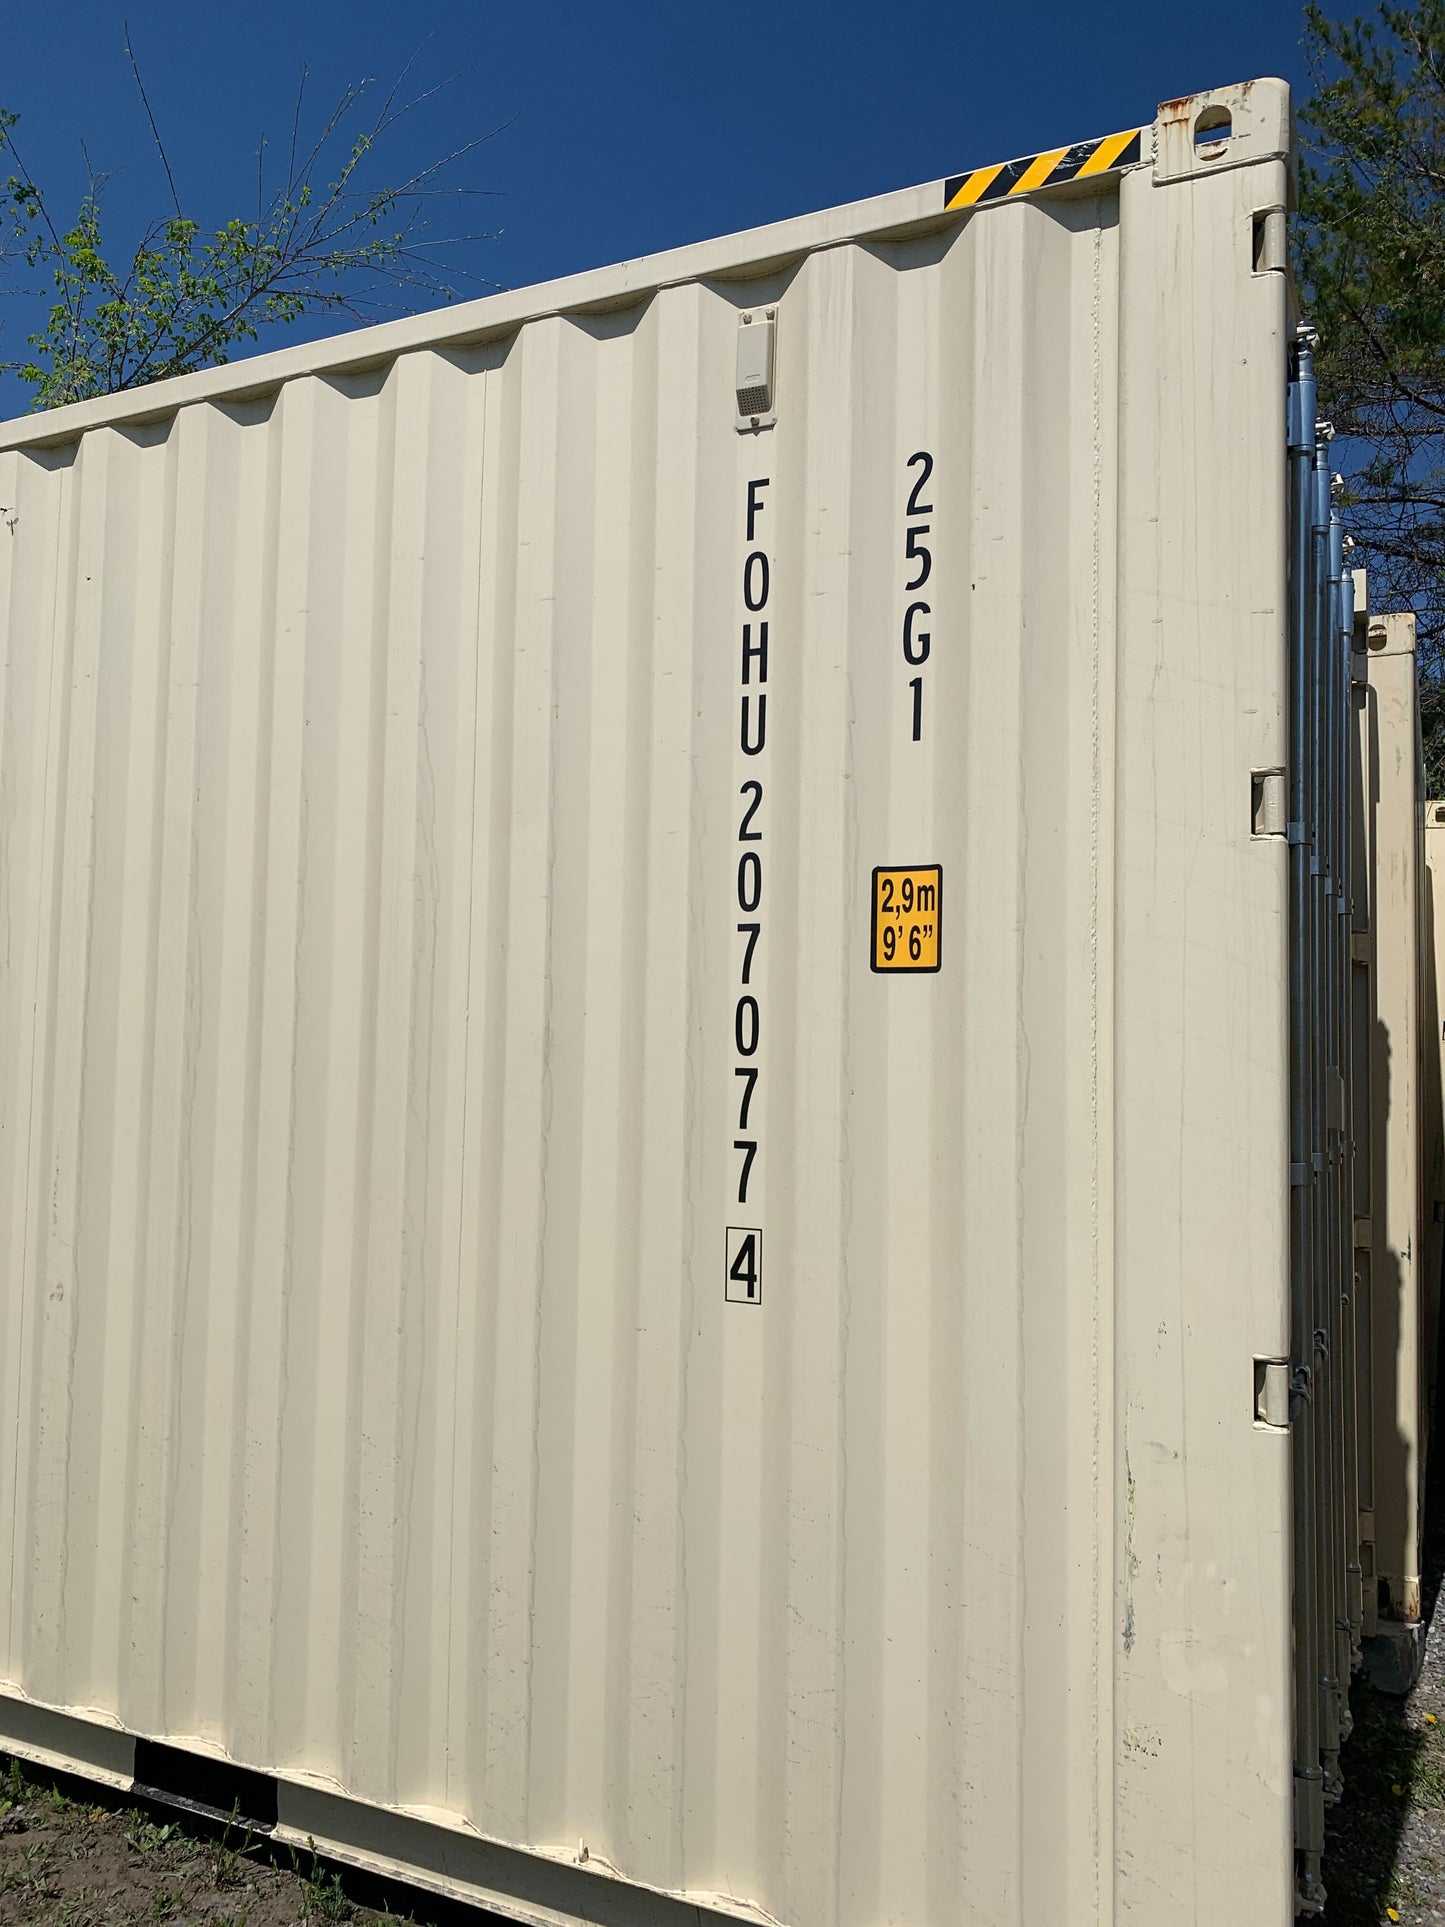 New 20' High Cube Shipping Containers in Ottawa